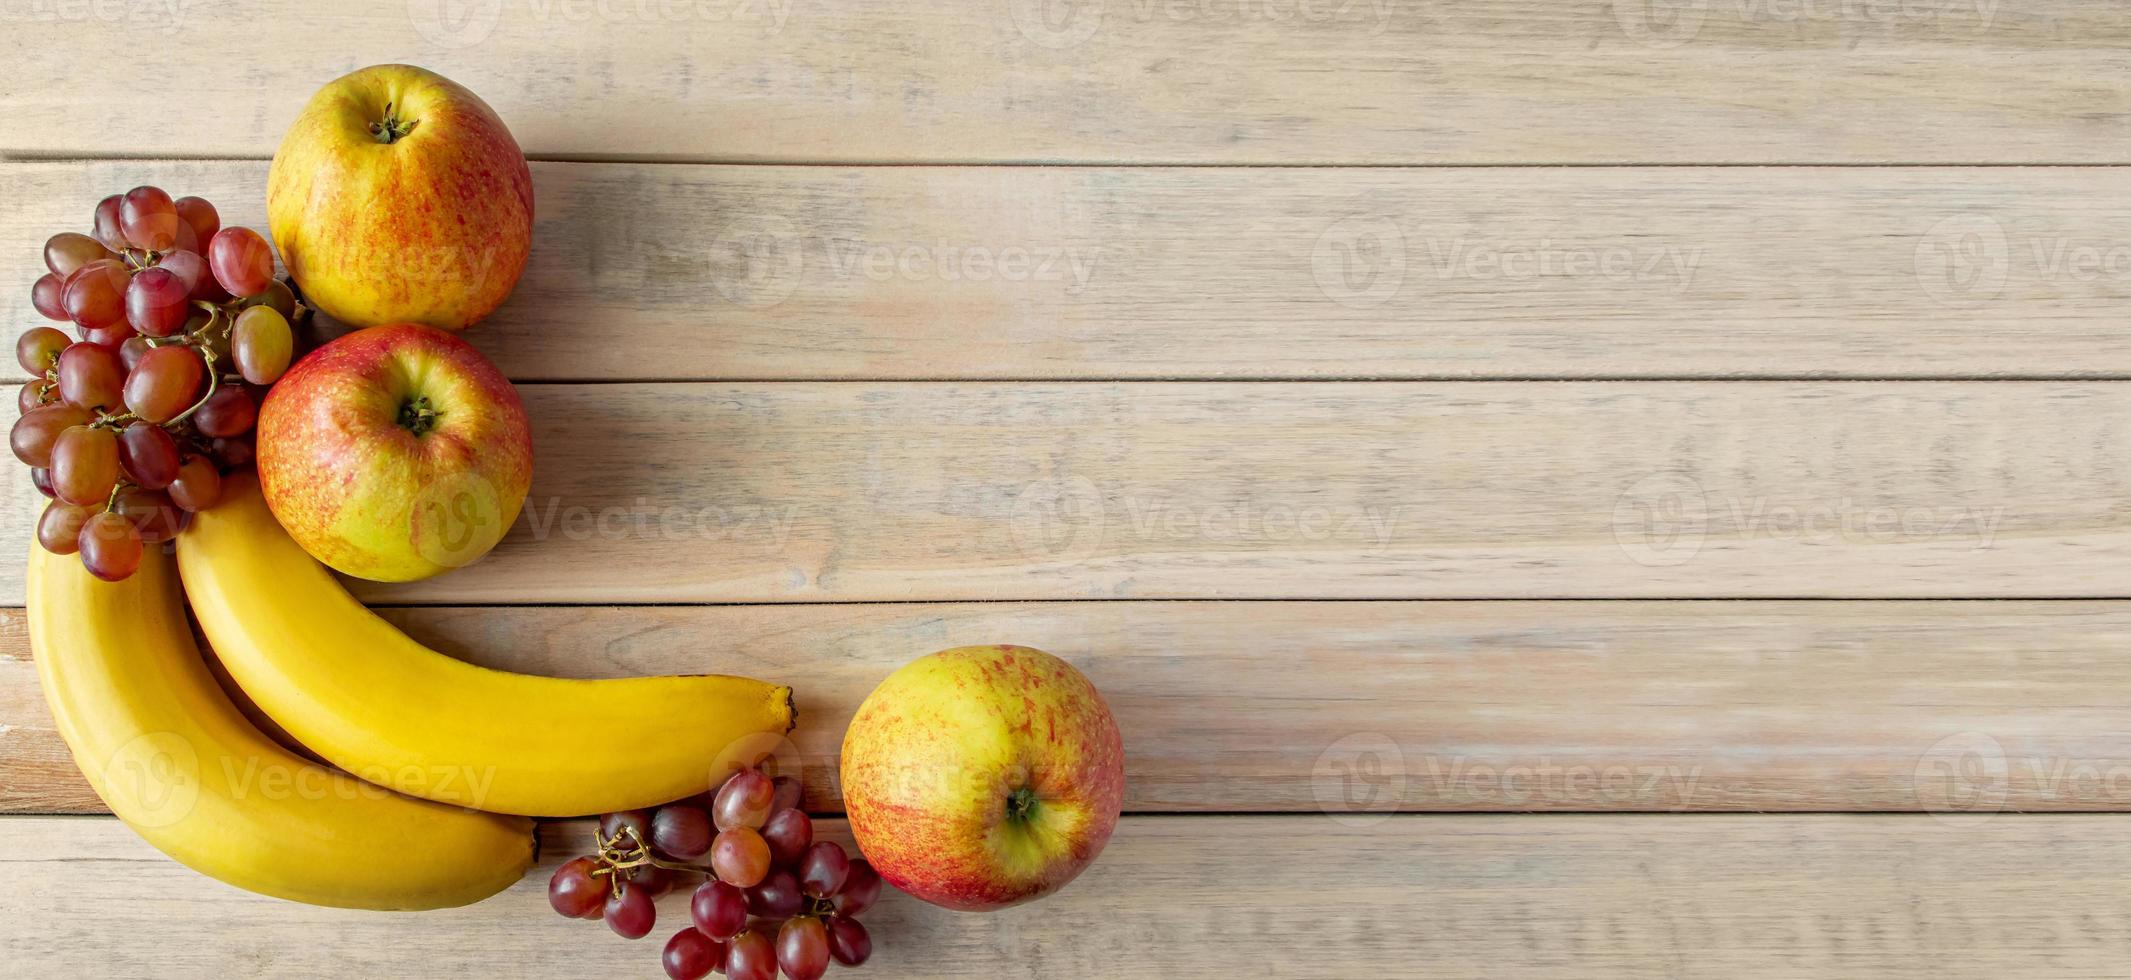 Ripe fruits on wooden background. Bananas, apples and grapes. Harvest concept. photo